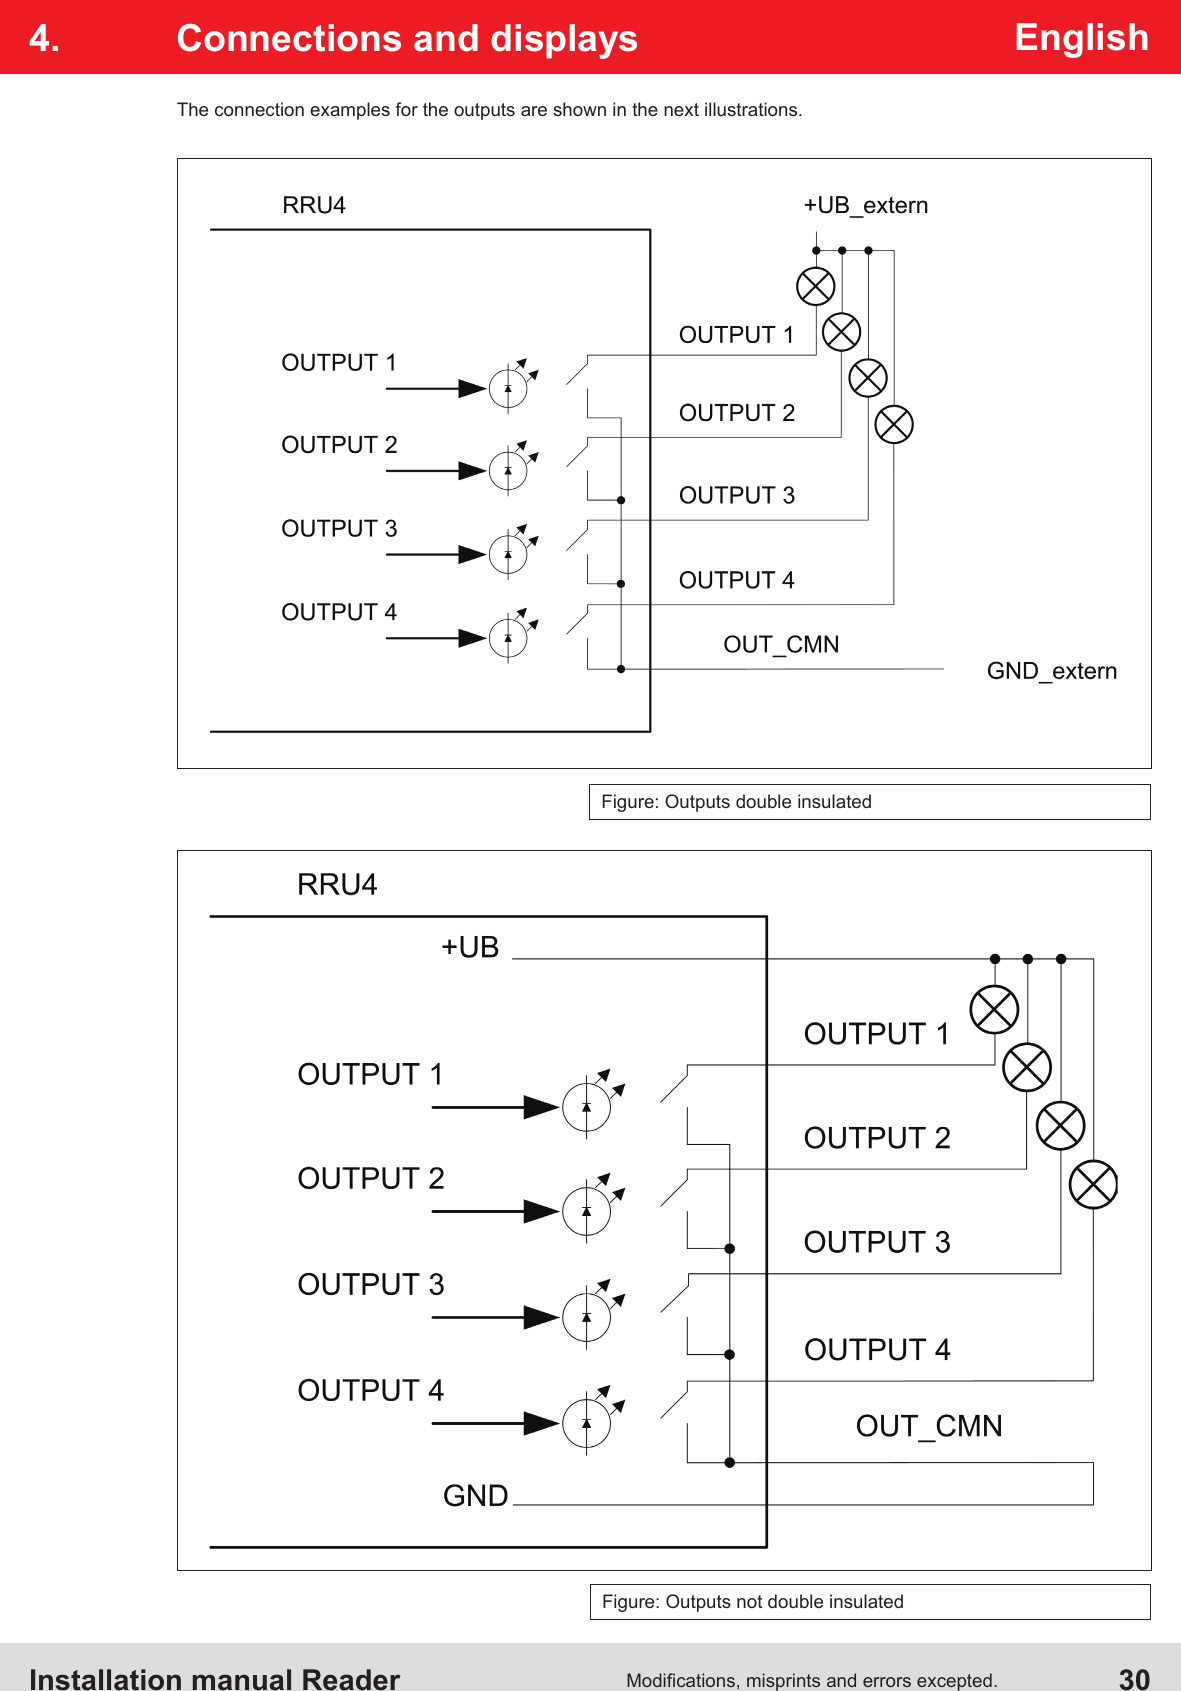 Installation manual Reader  30Modications, misprints and errors excepted.English4.  Connections and displaysThe connection examples for the outputs are shown in the next illustrations.Figure: Outputs double insulatedFigure: Outputs not double insulated